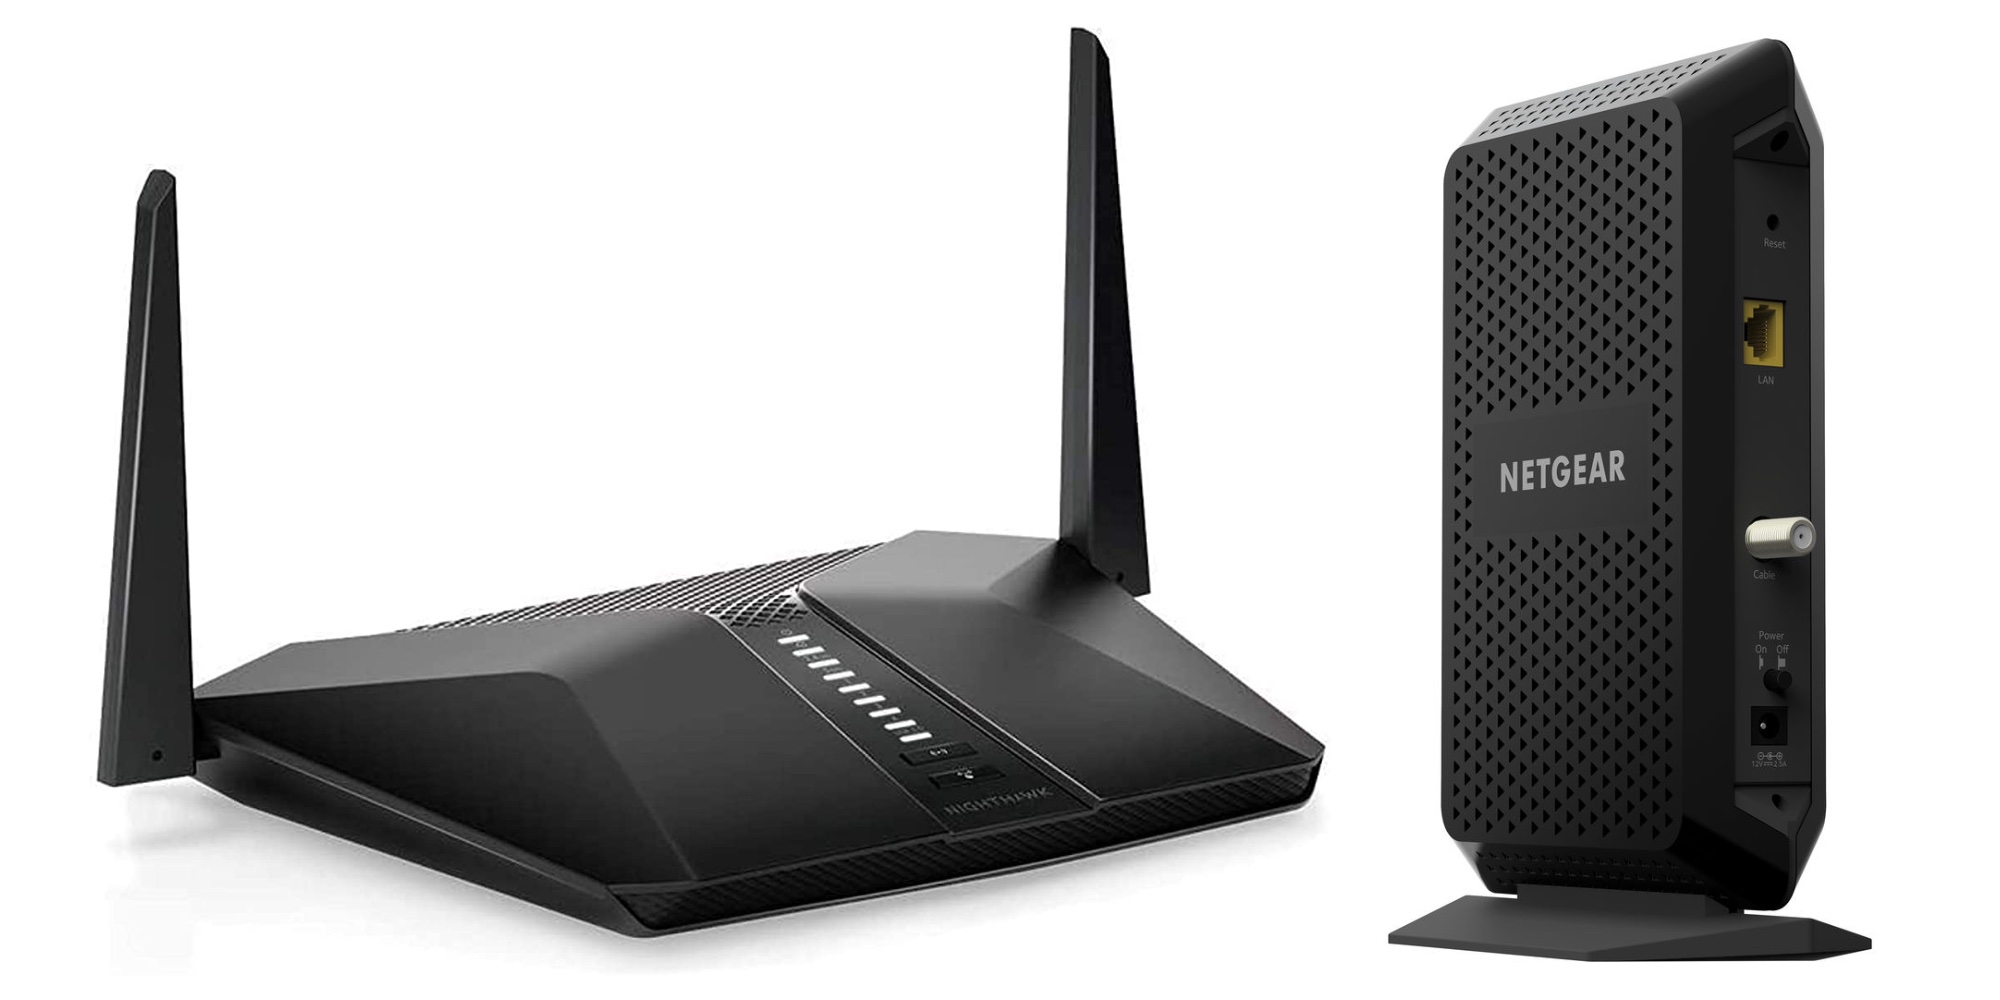 NETGEAR's WiFi 6 router and DOCSIS 3.1 model bundle drops to 279